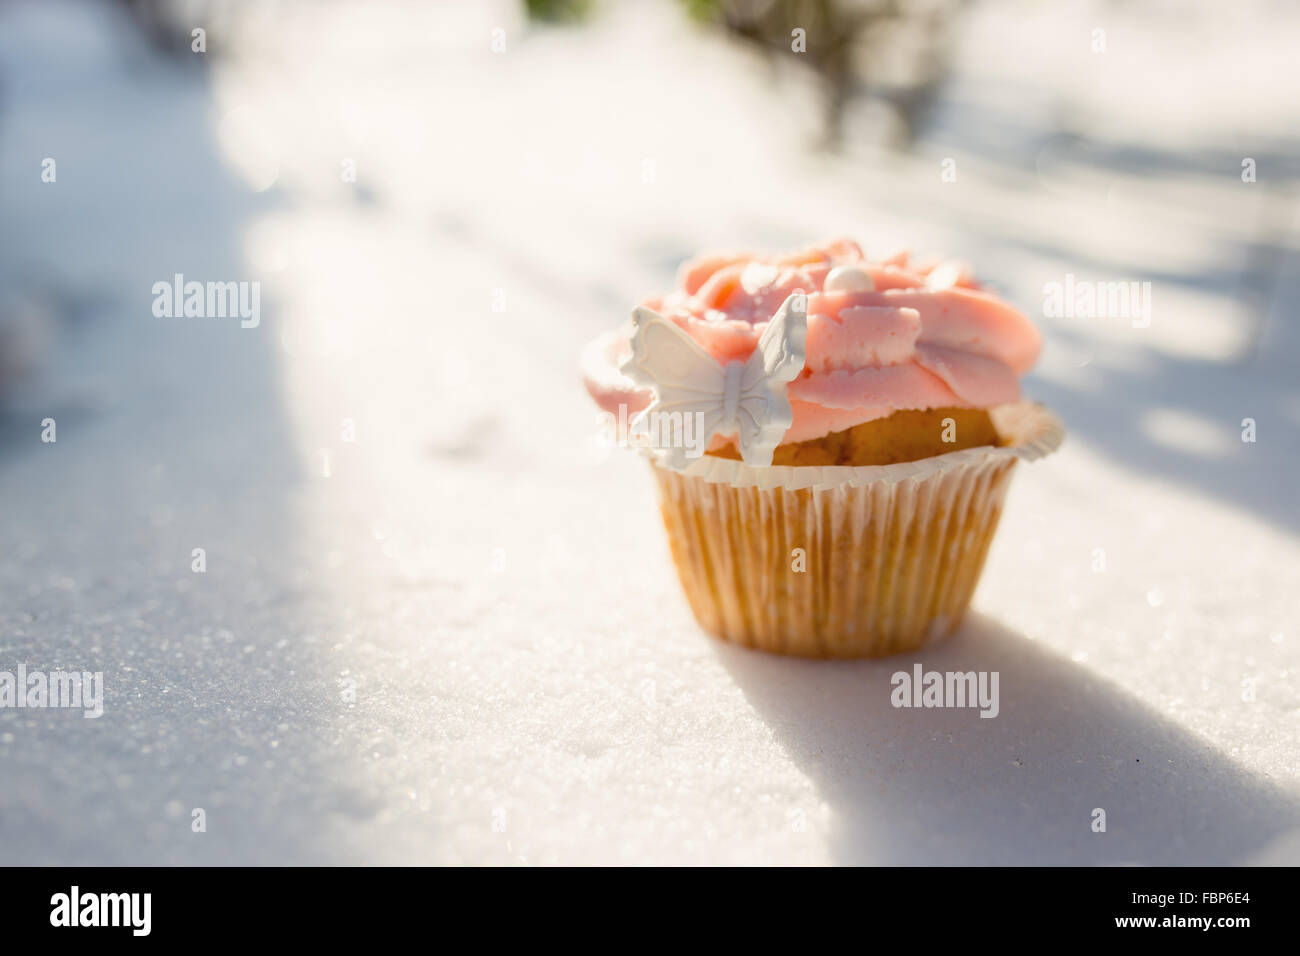 Outdoor photo of cupcake decorated with a sugar butterfly. Cupca Stock Photo